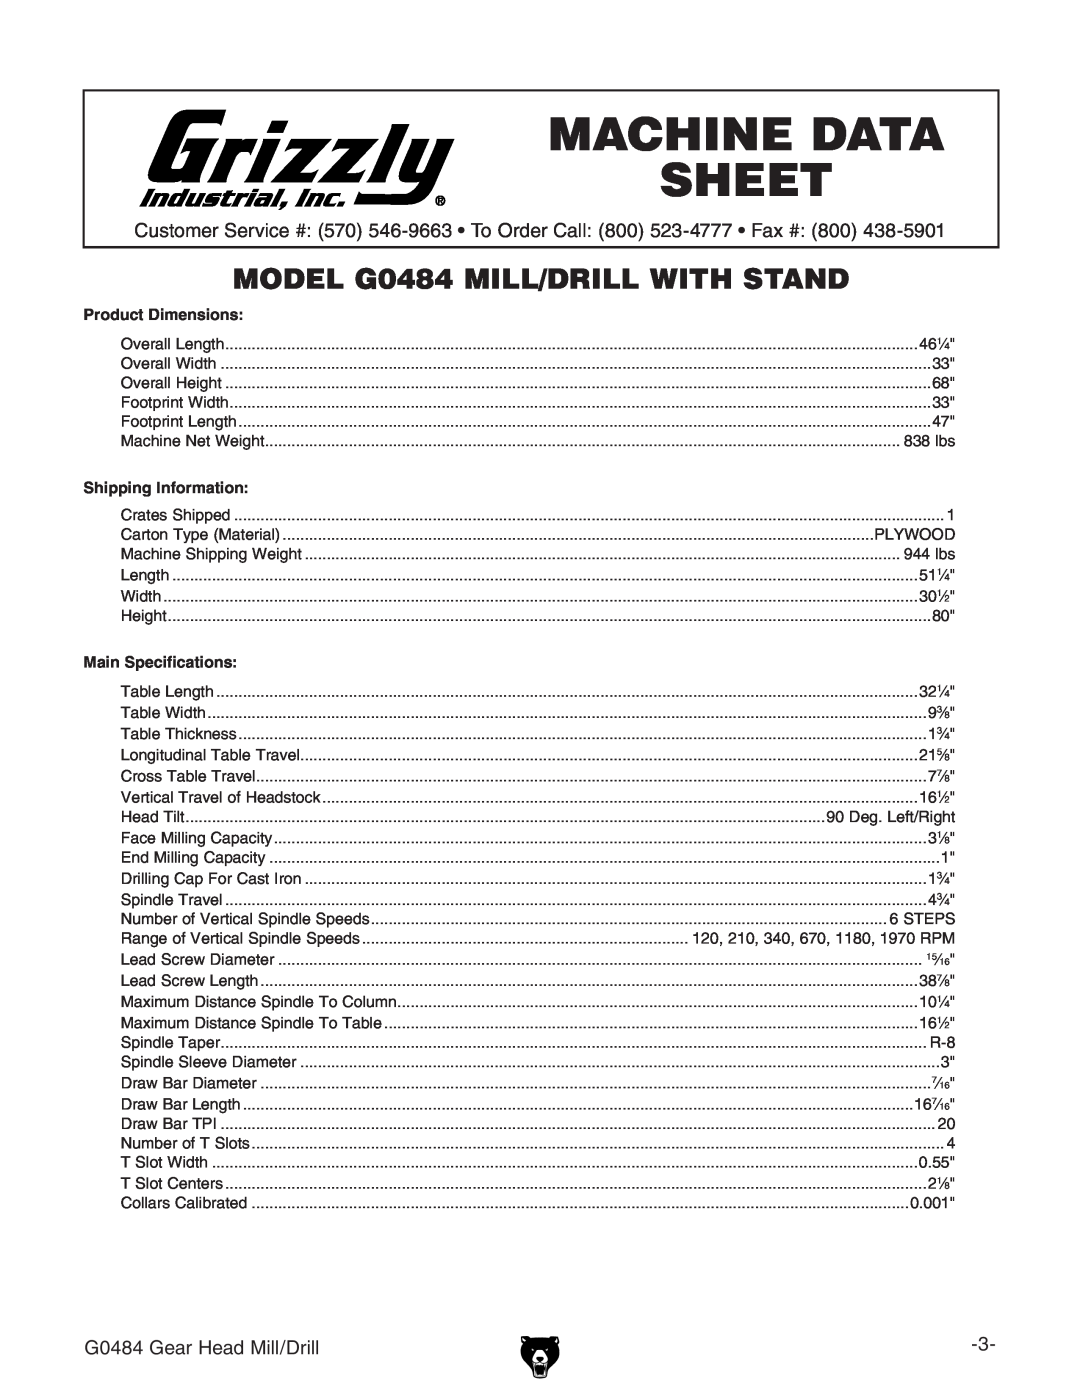 Grizzly owner manual Machine Data Sheet, G0484 Gear Head Mill/Drill 